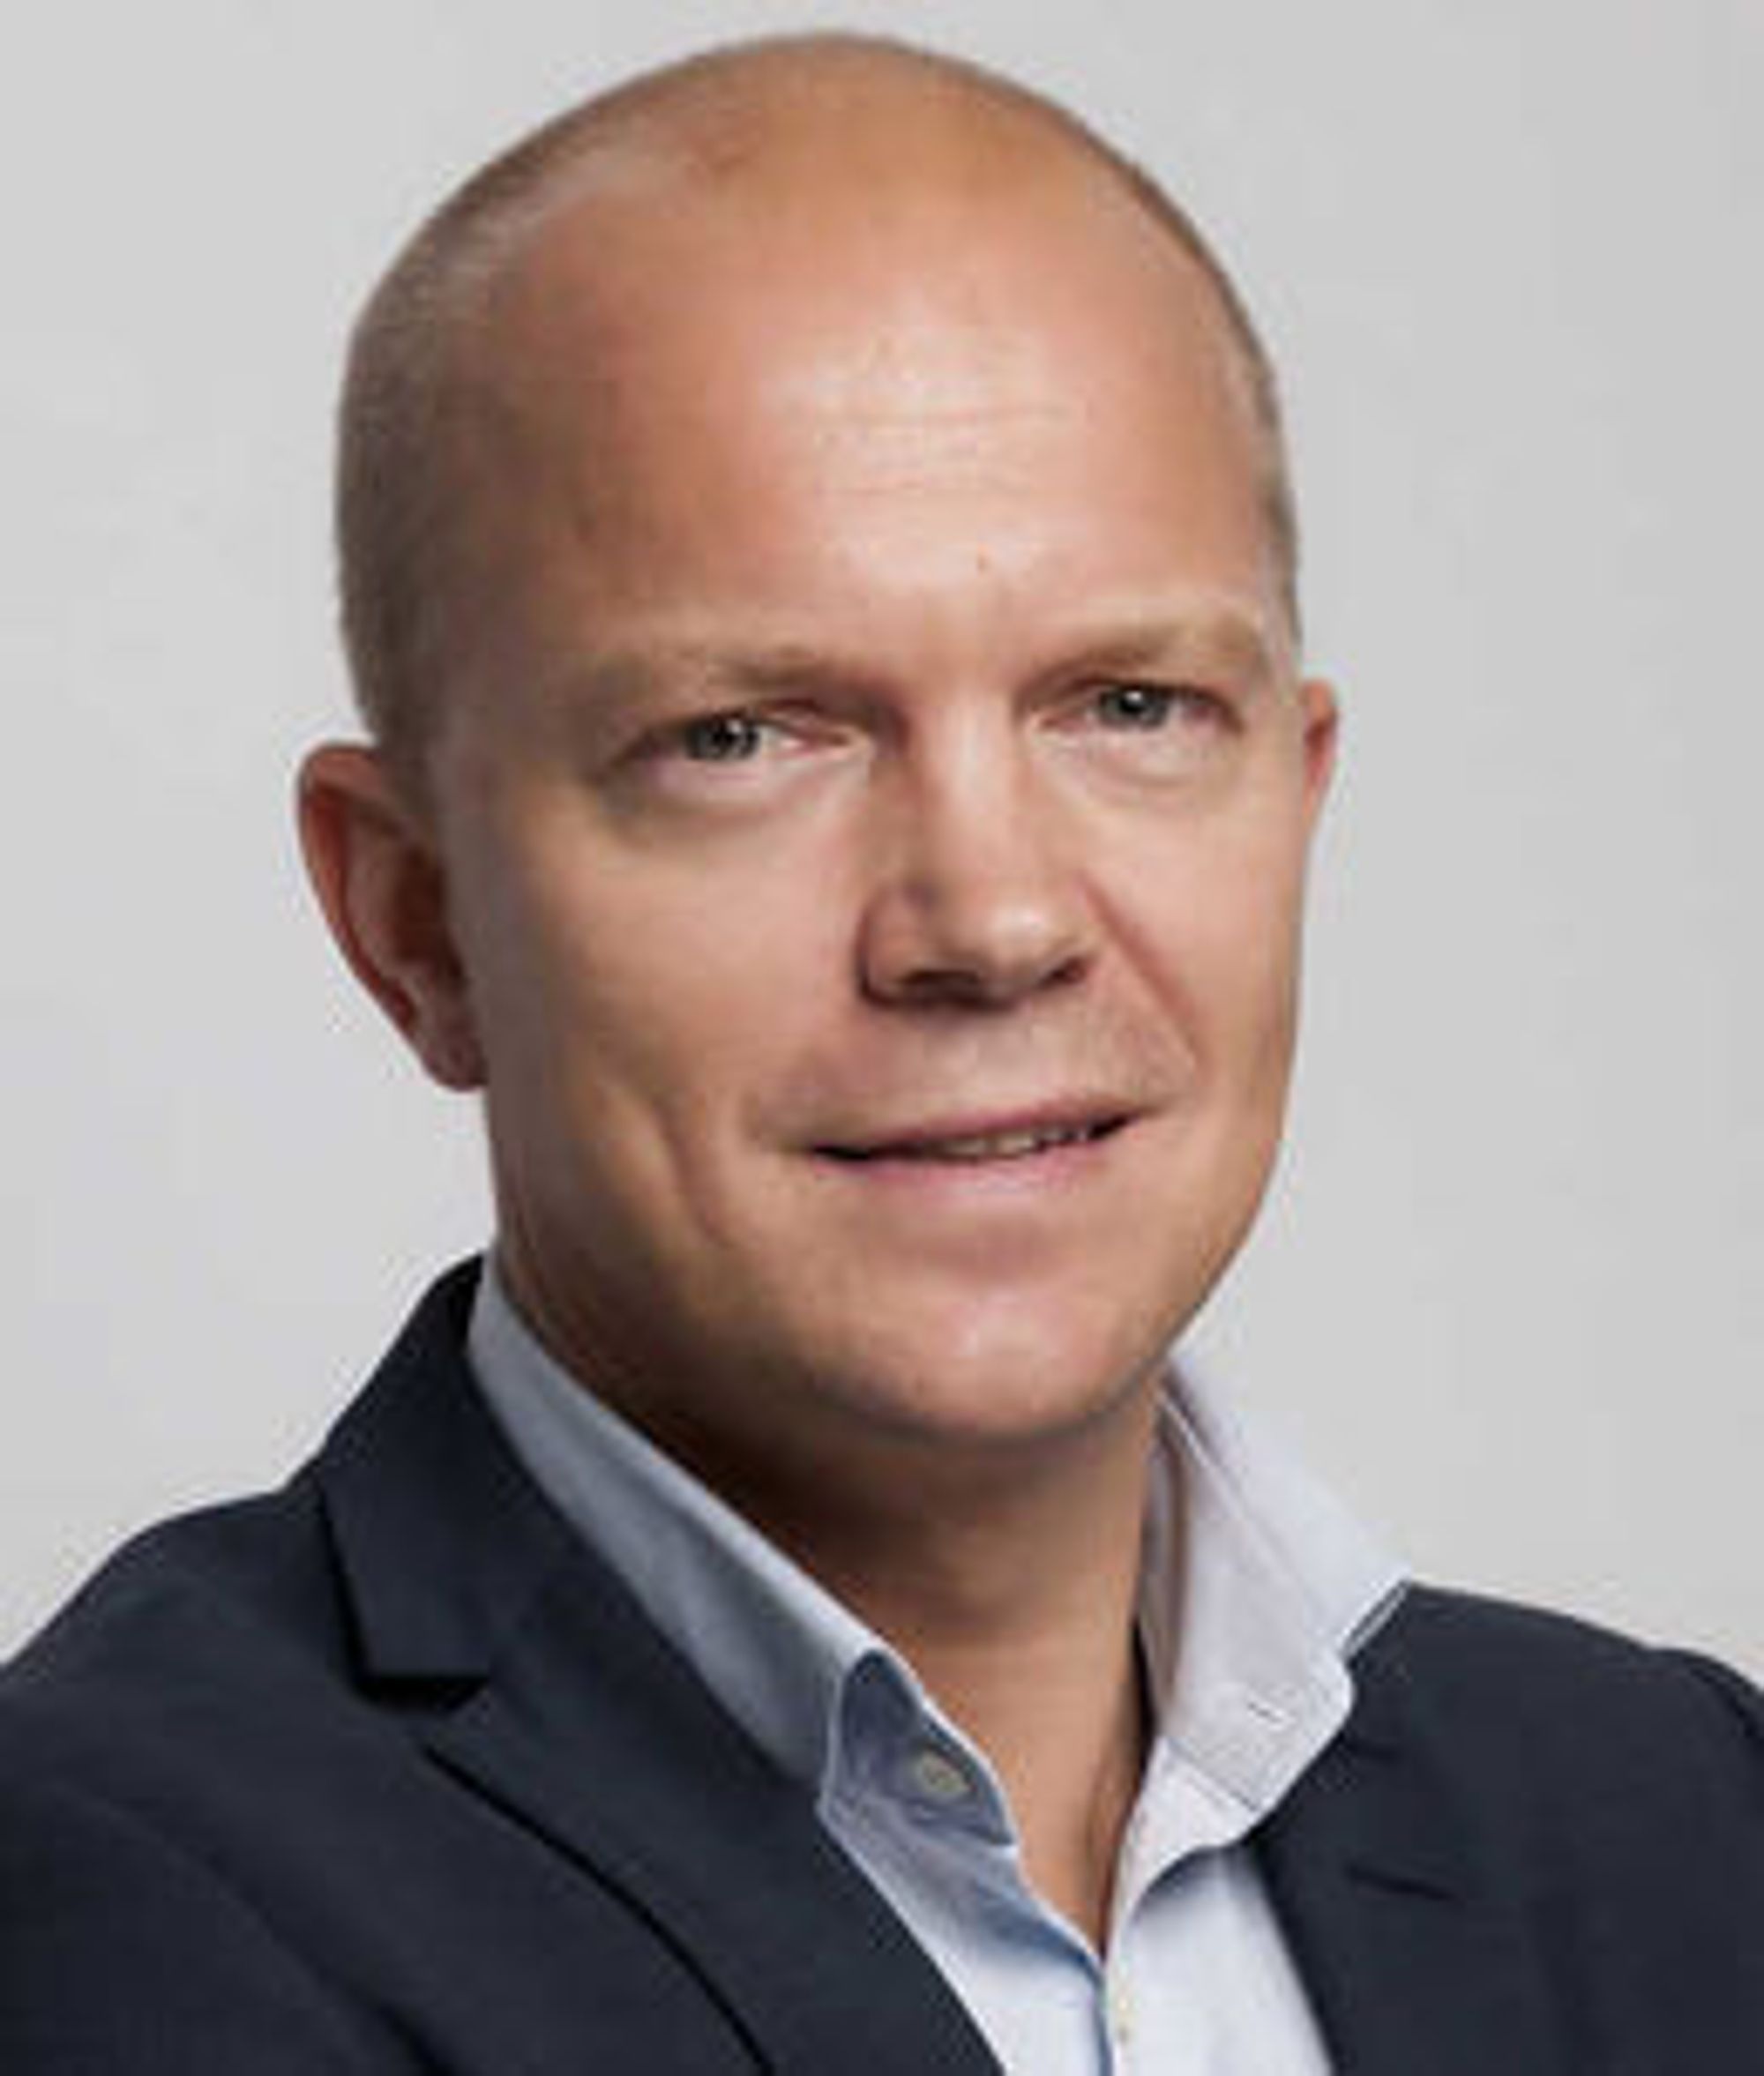 Andreas Hisdal er chief operating officer i Intility.